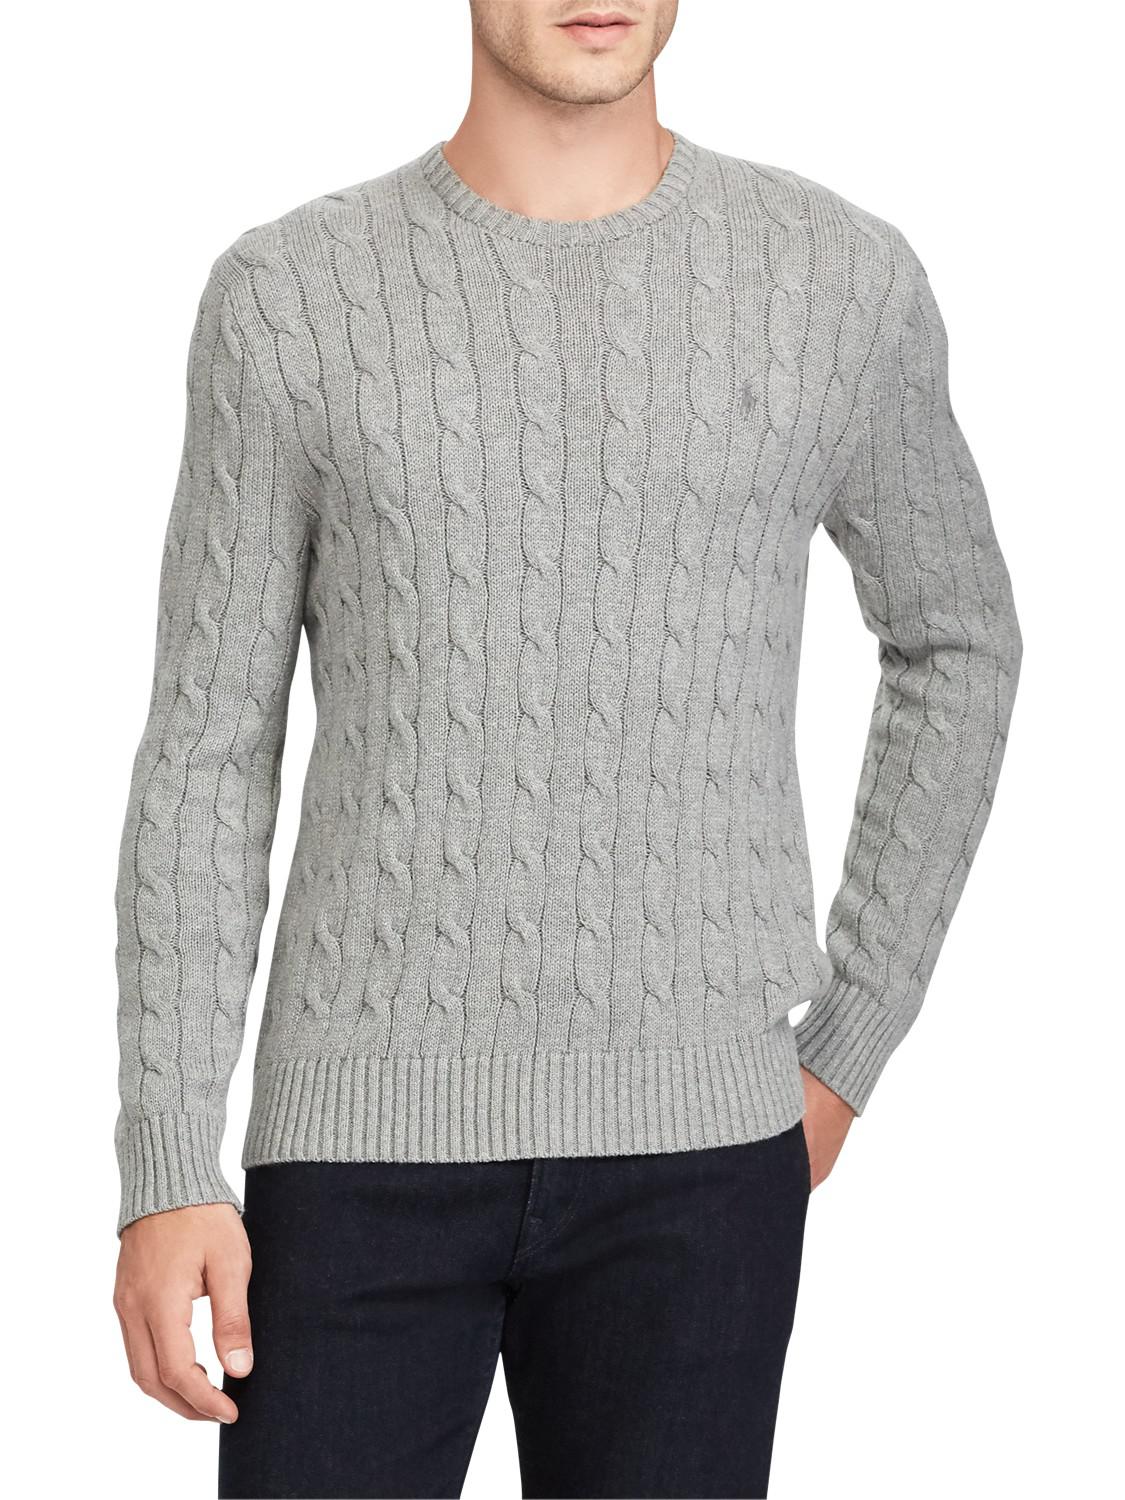 Ralph Lauren Cotton Polo Crew Neck Cable Knit Jumper in Grey for Men - Lyst